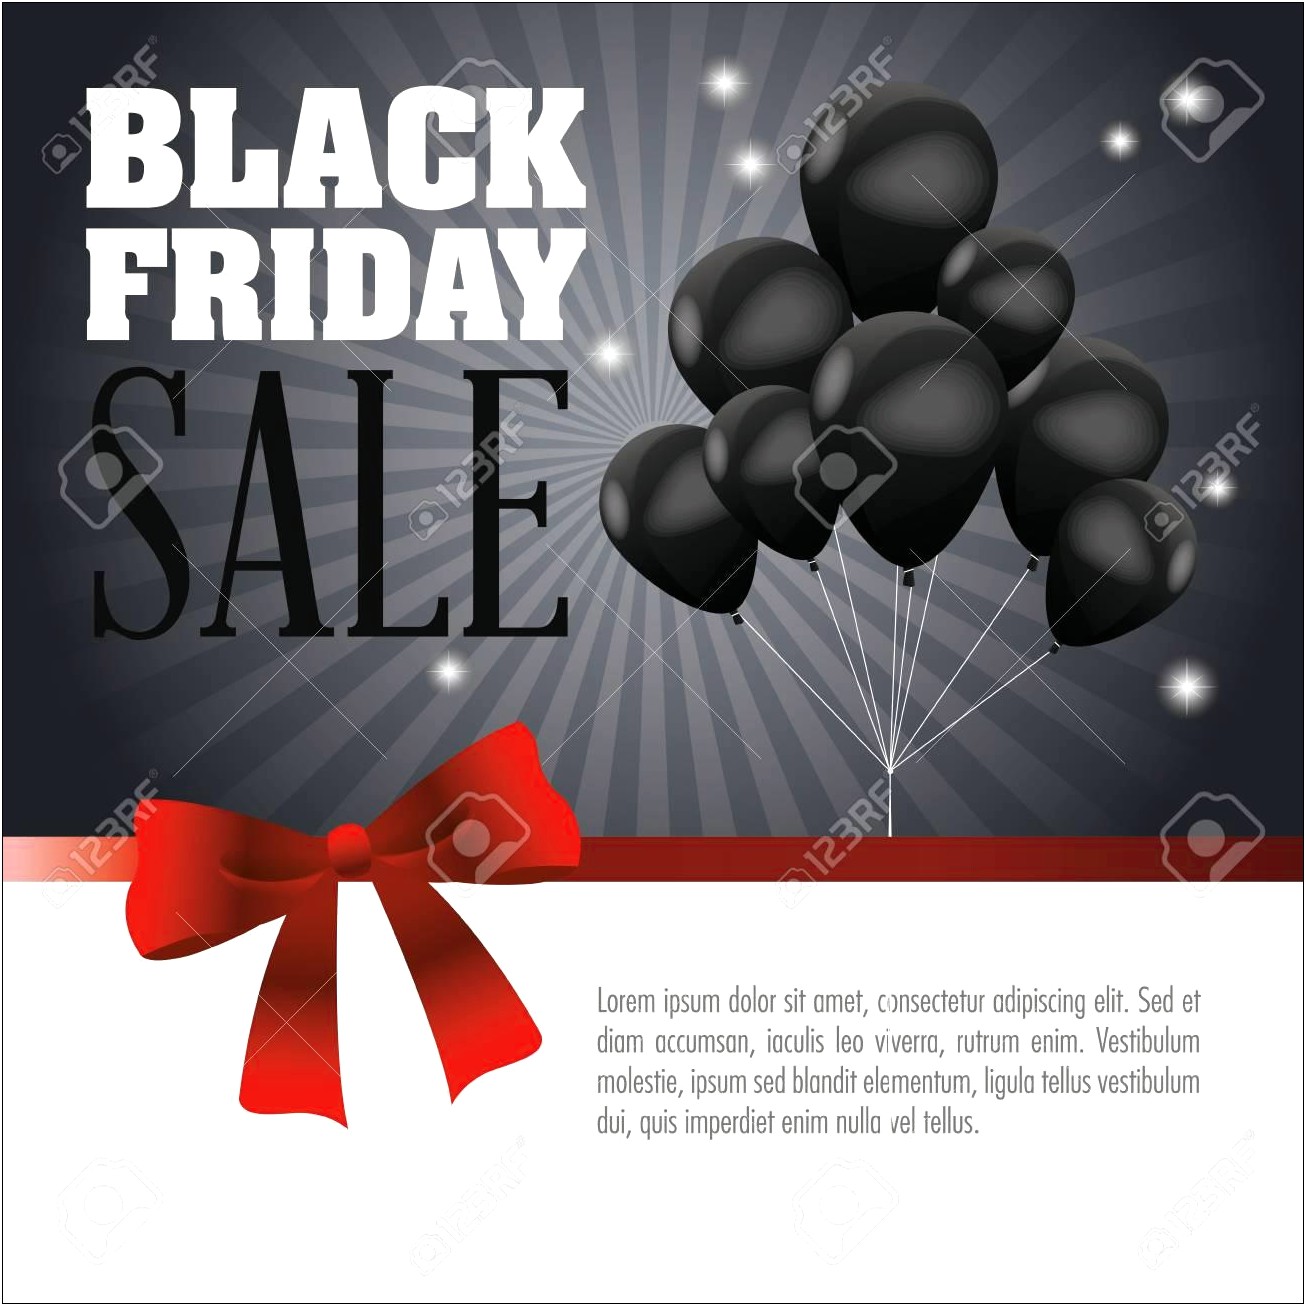 Black Friday Free Templates With Balloons